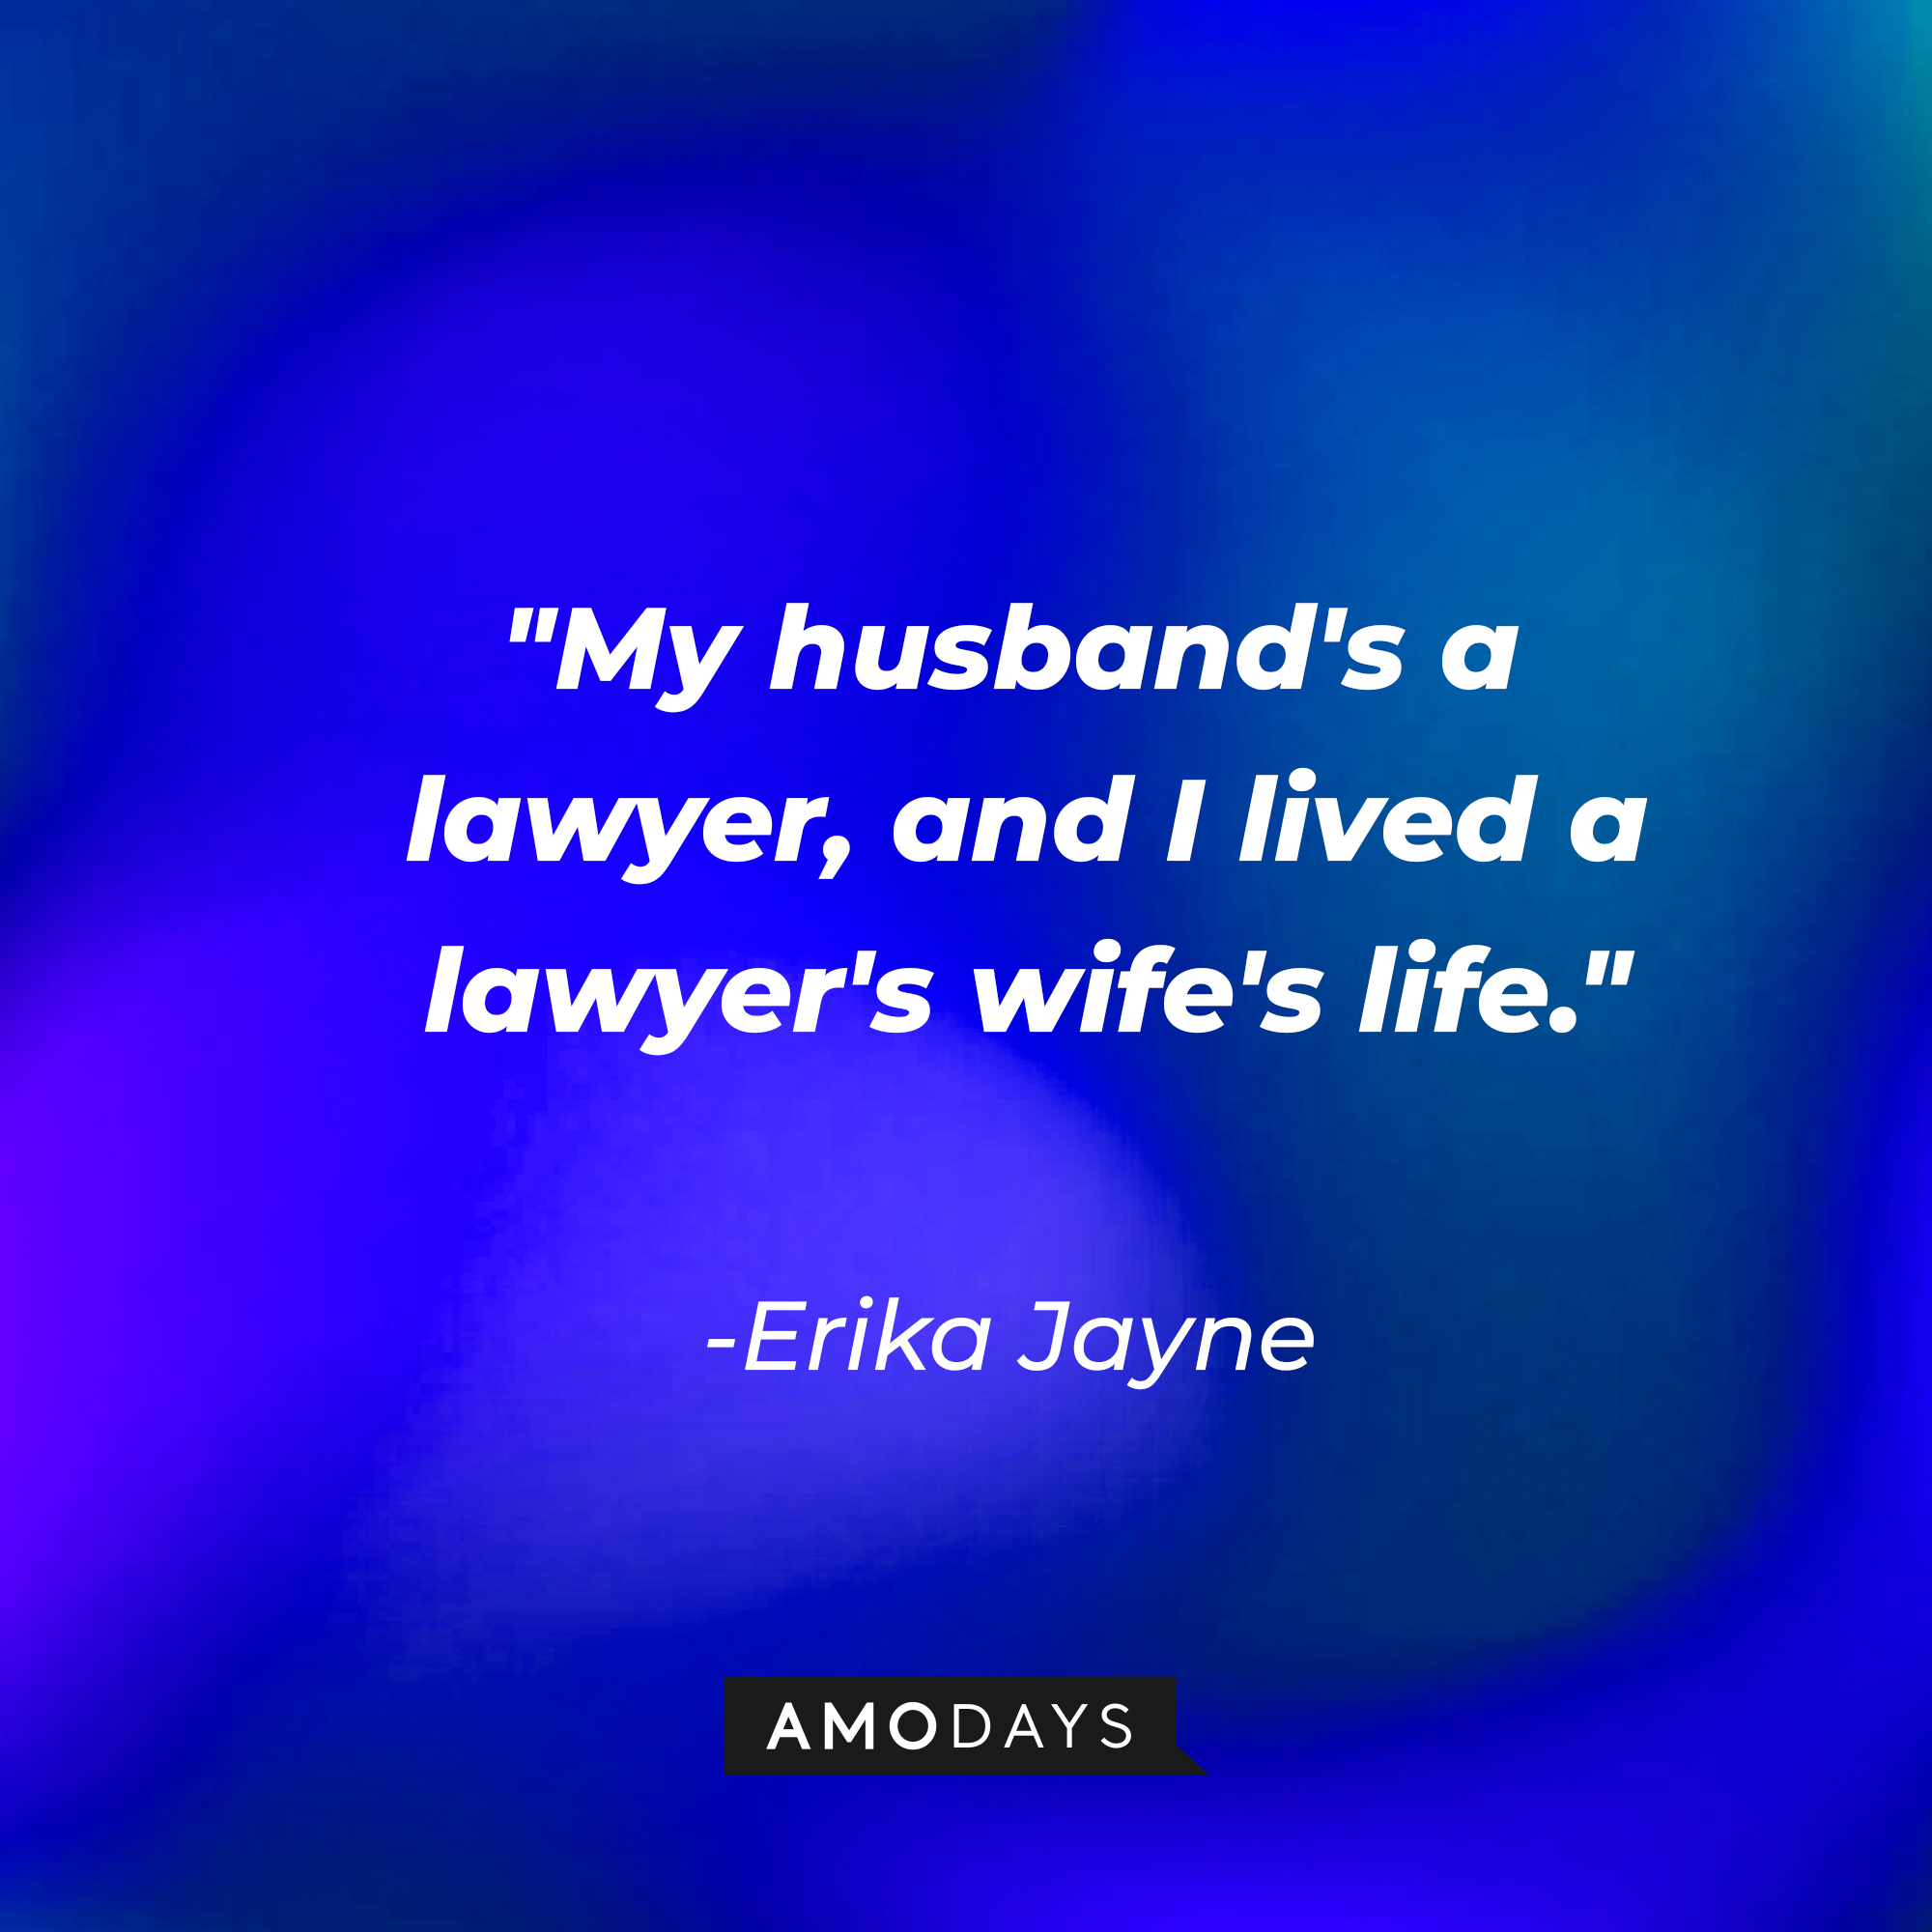 Erika Jayne’s quote: "My husband's a lawyer, and I lived a lawyer's wife's life." | Image: Amodays